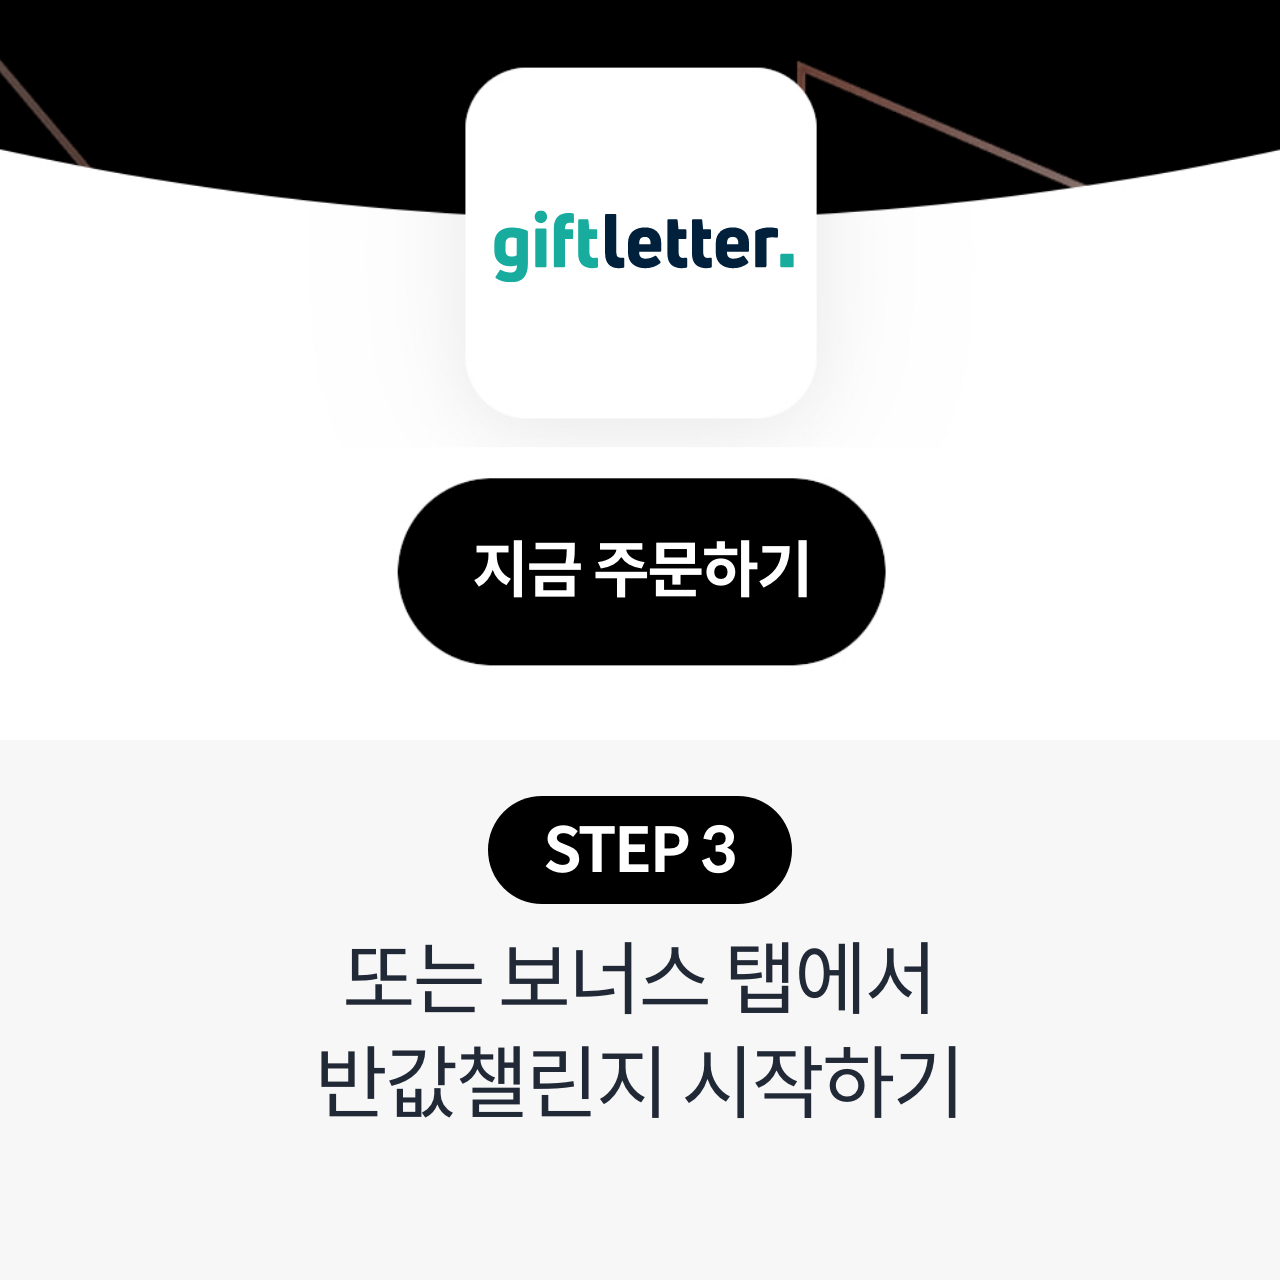 giftletter_hiw3_web